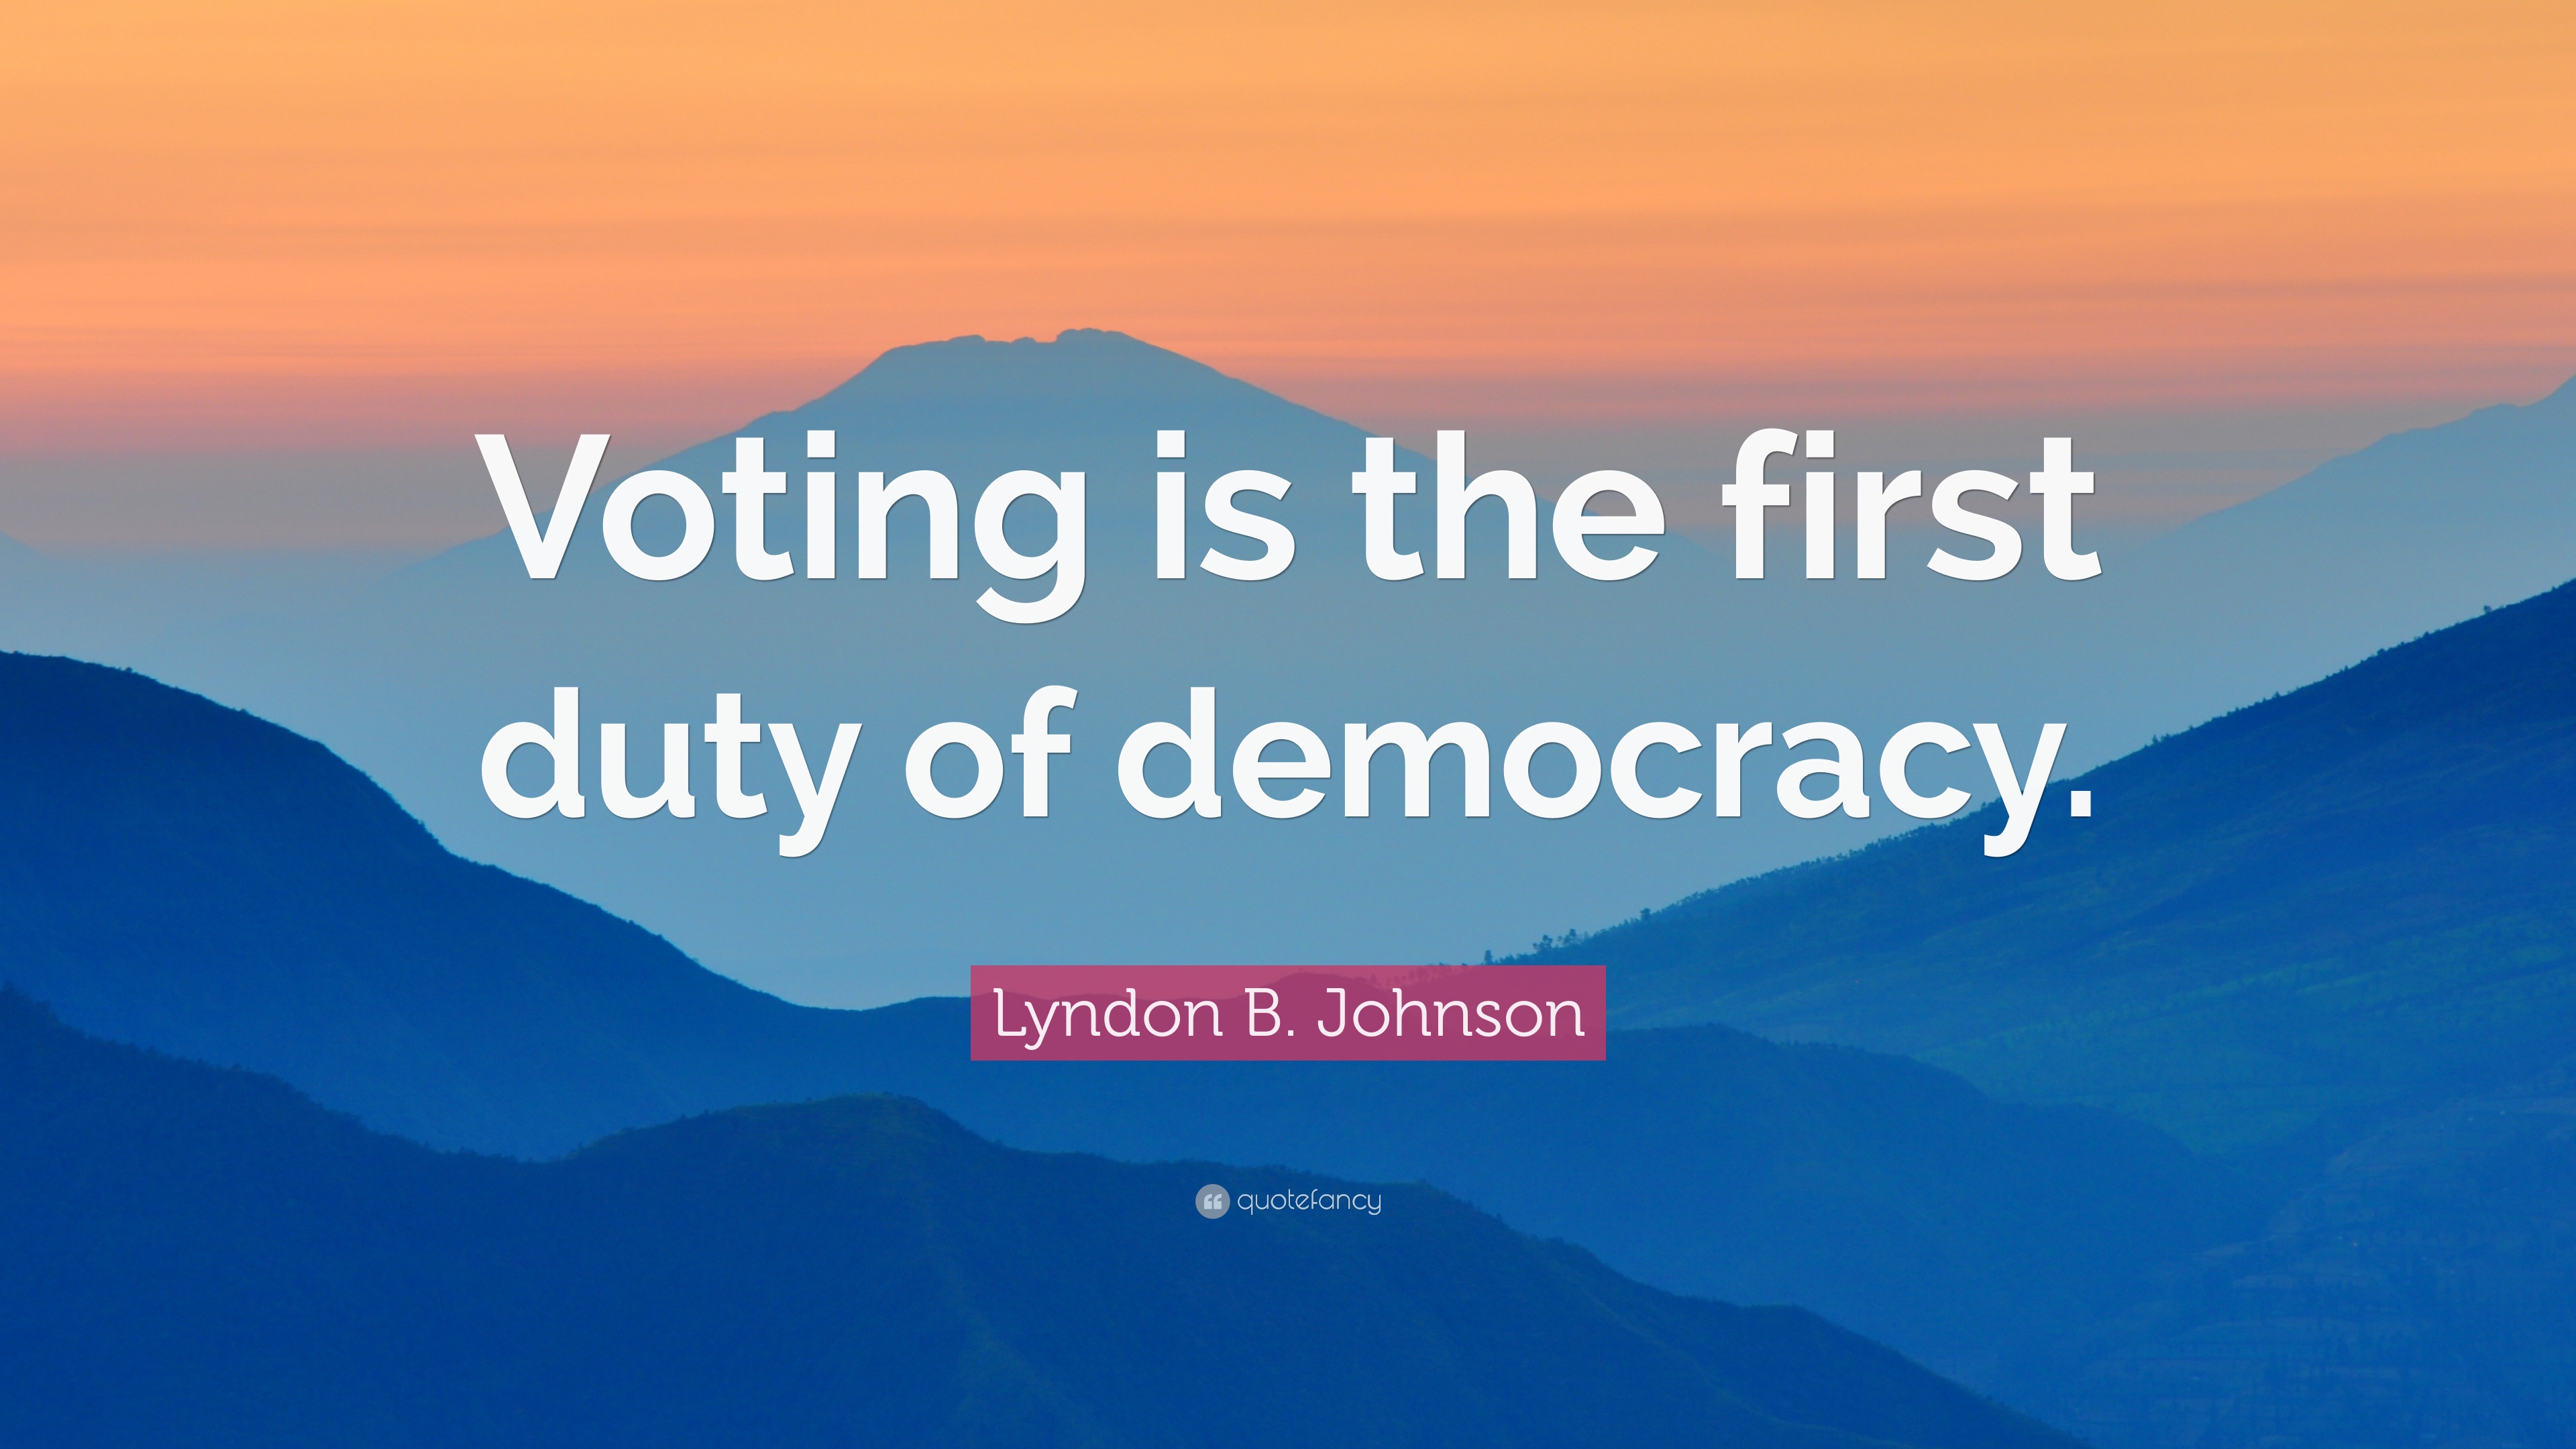 Lyndon B. Johnson Quote: “Voting is the first duty of democracy